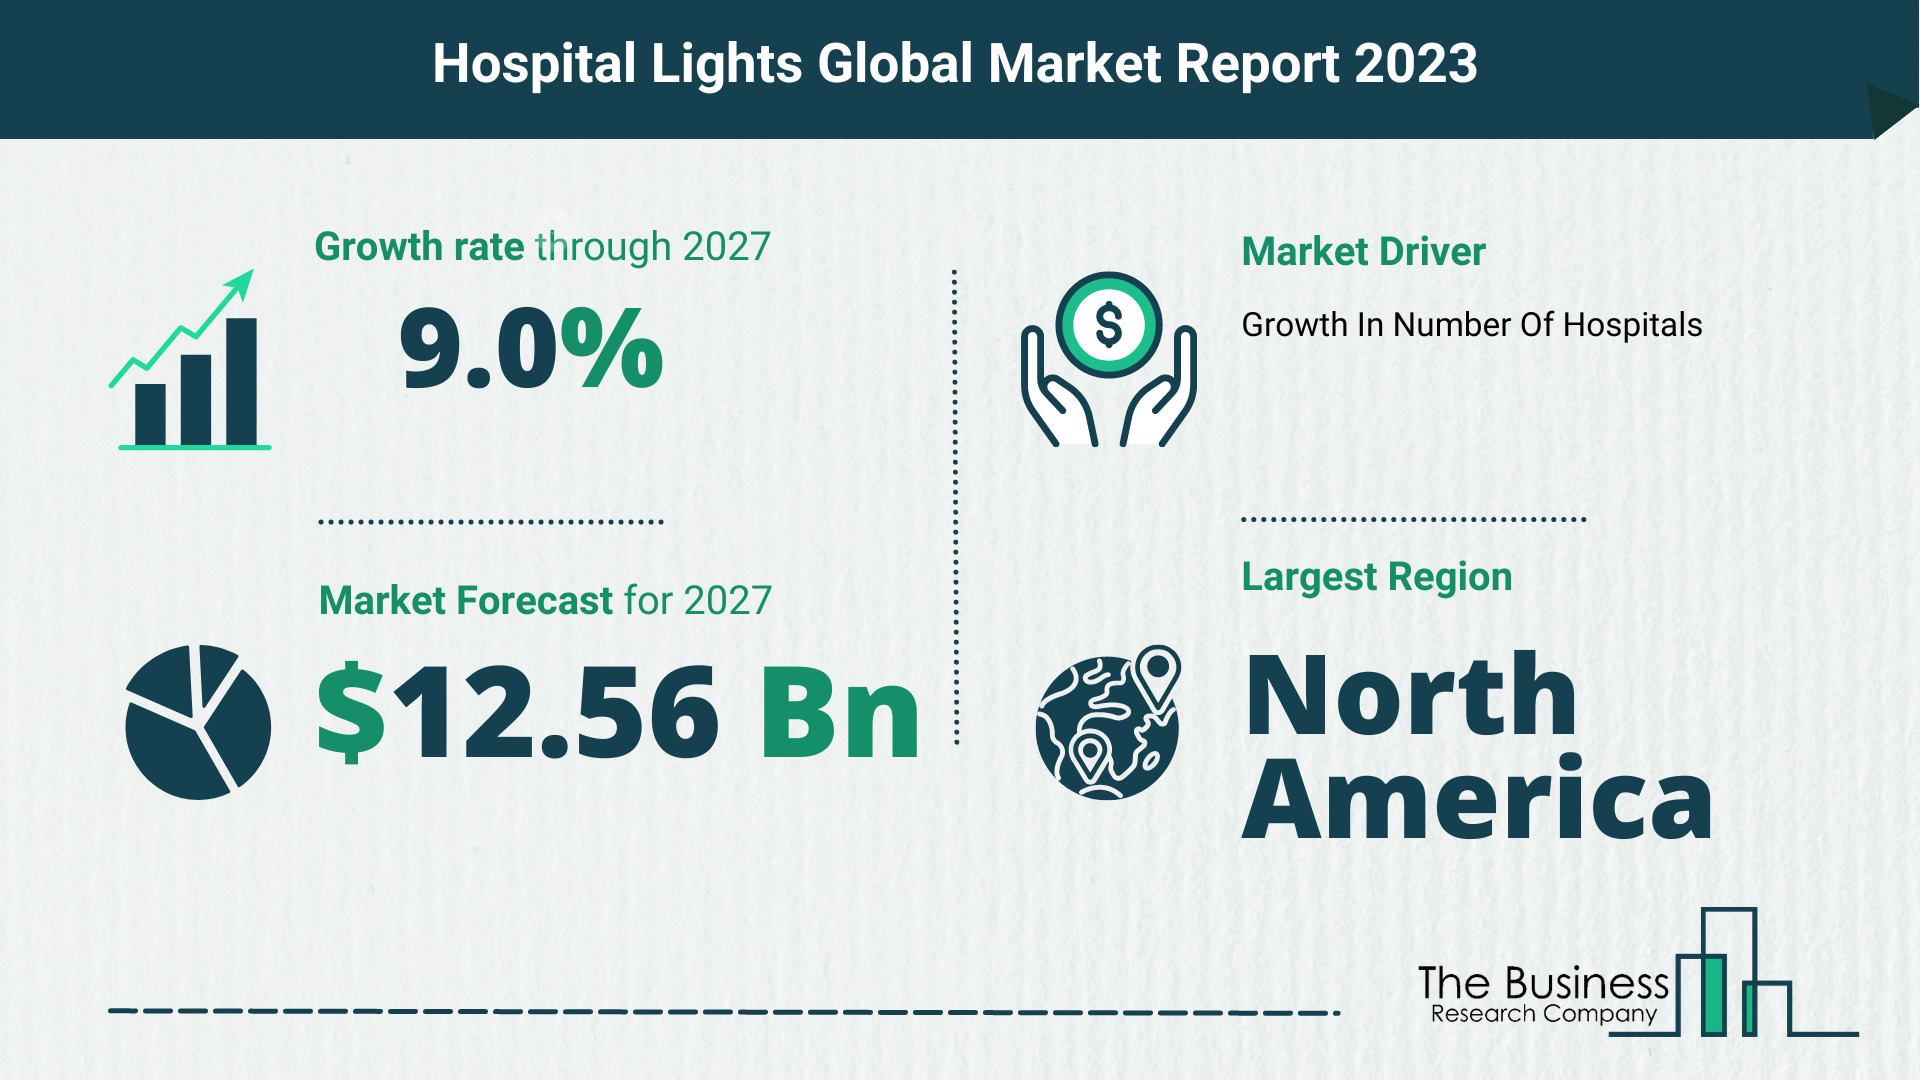 Global Hospital Lights Market Opportunities And Strategies 2023